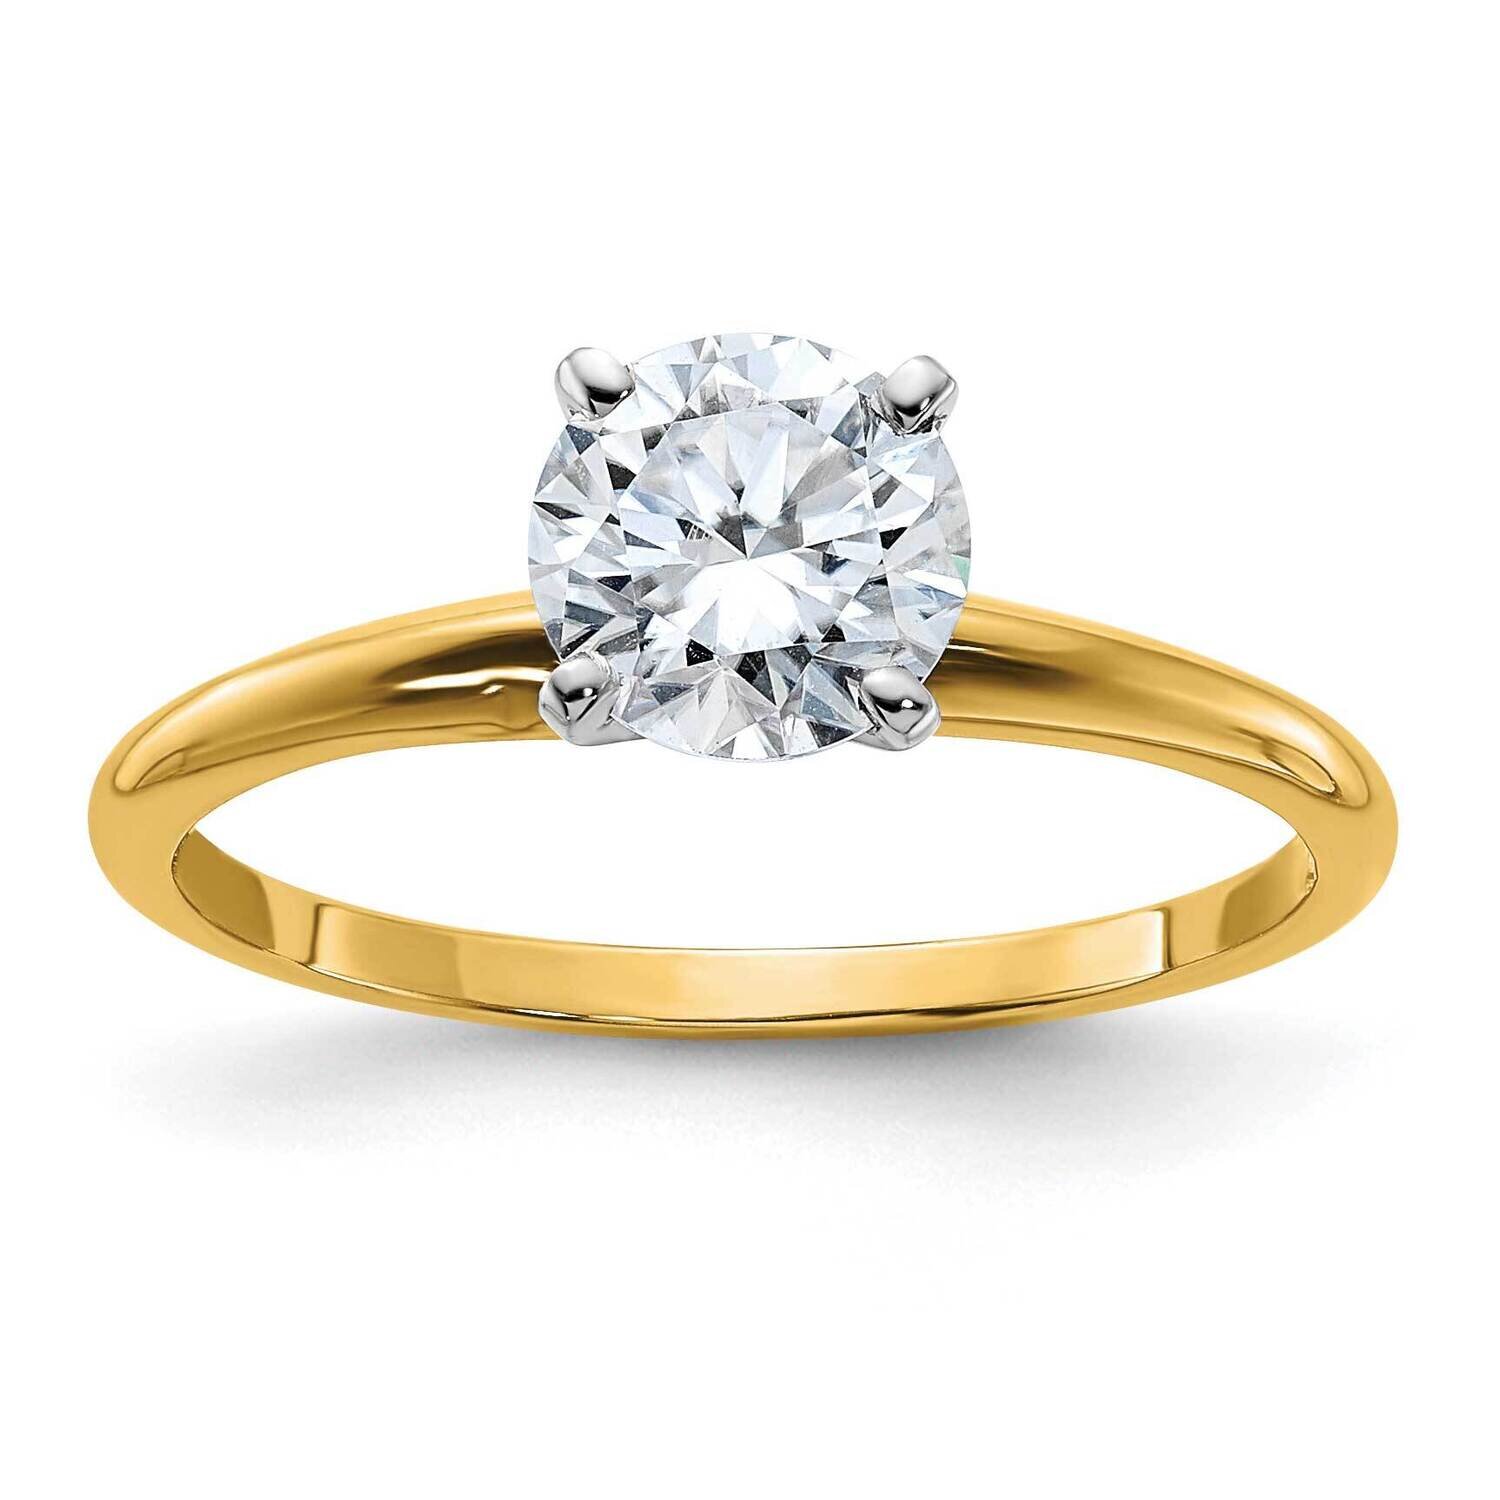 1ct. D E F Pure Light Round Moissanite Solitaire Ring 14k Gold YGSH15-12MP-8